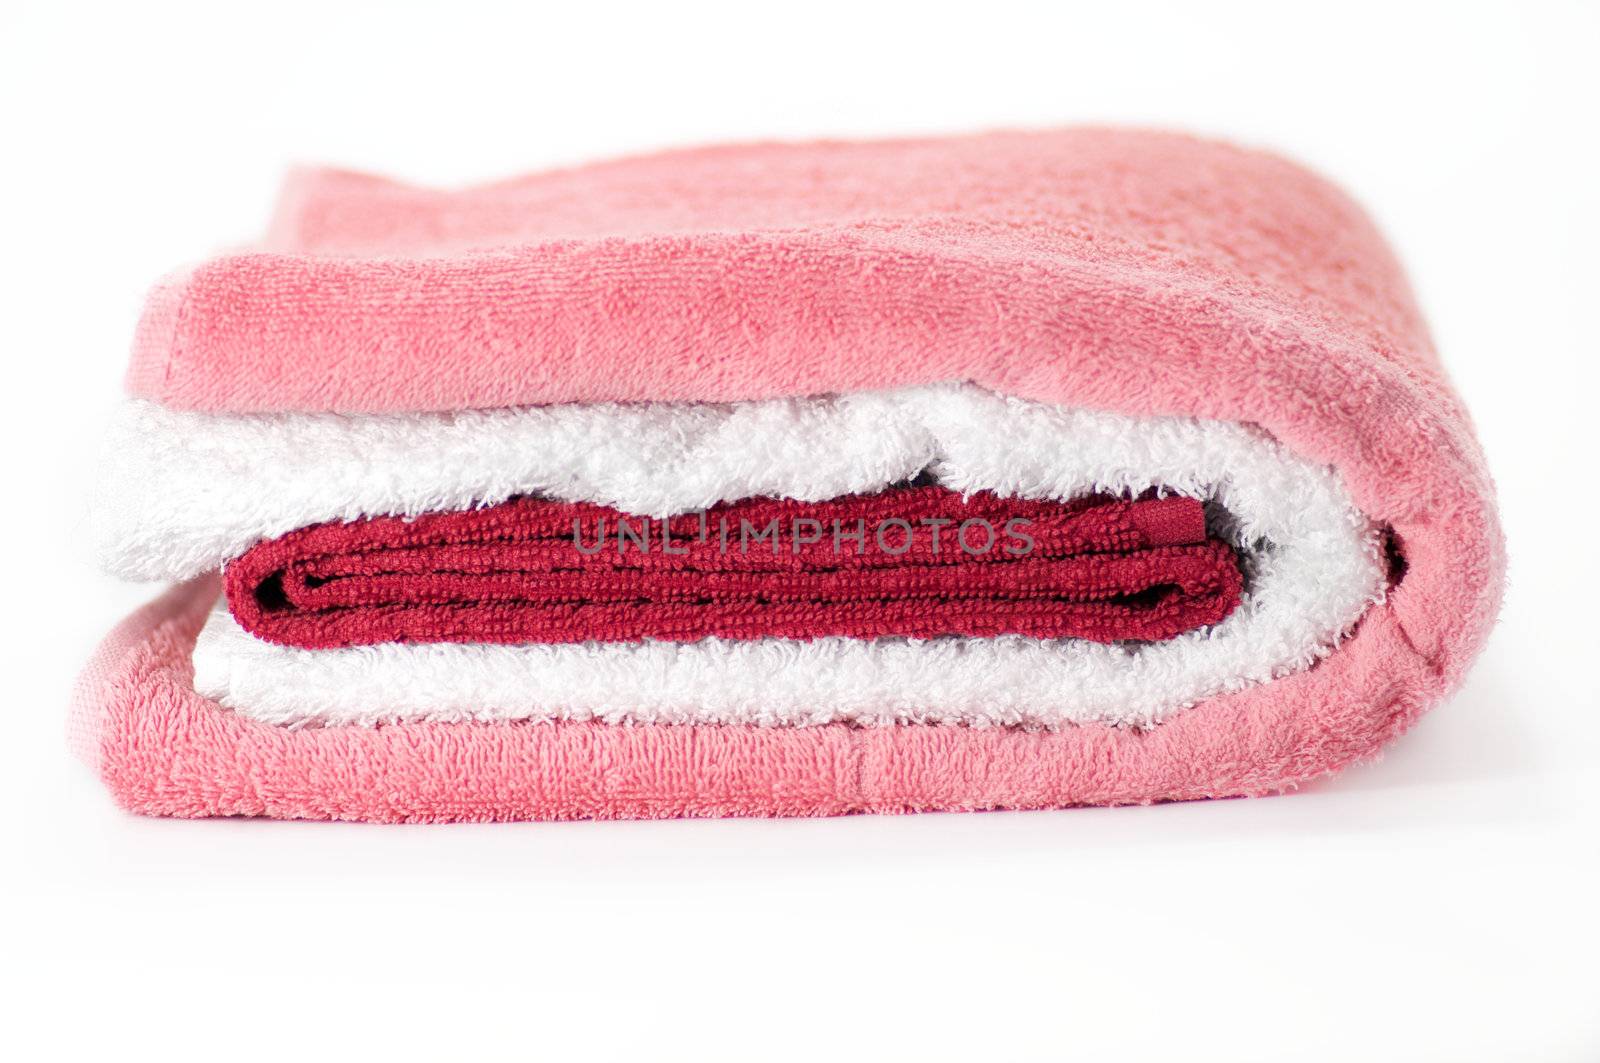 White, red and pink Terry towels by zhekos